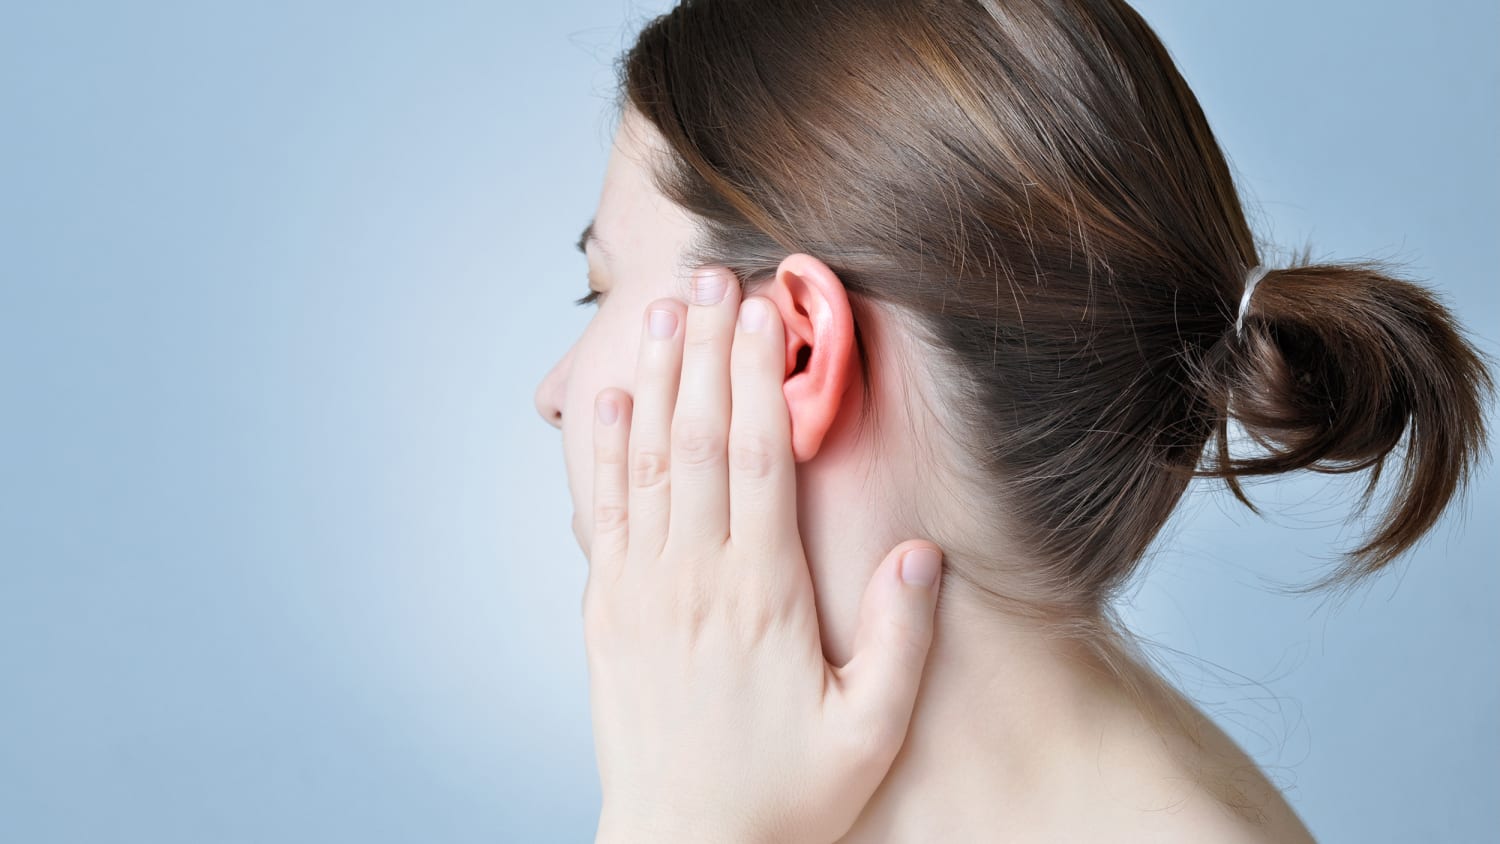 The Right Way to Clean Your Earring Hole, According to Dermatologists